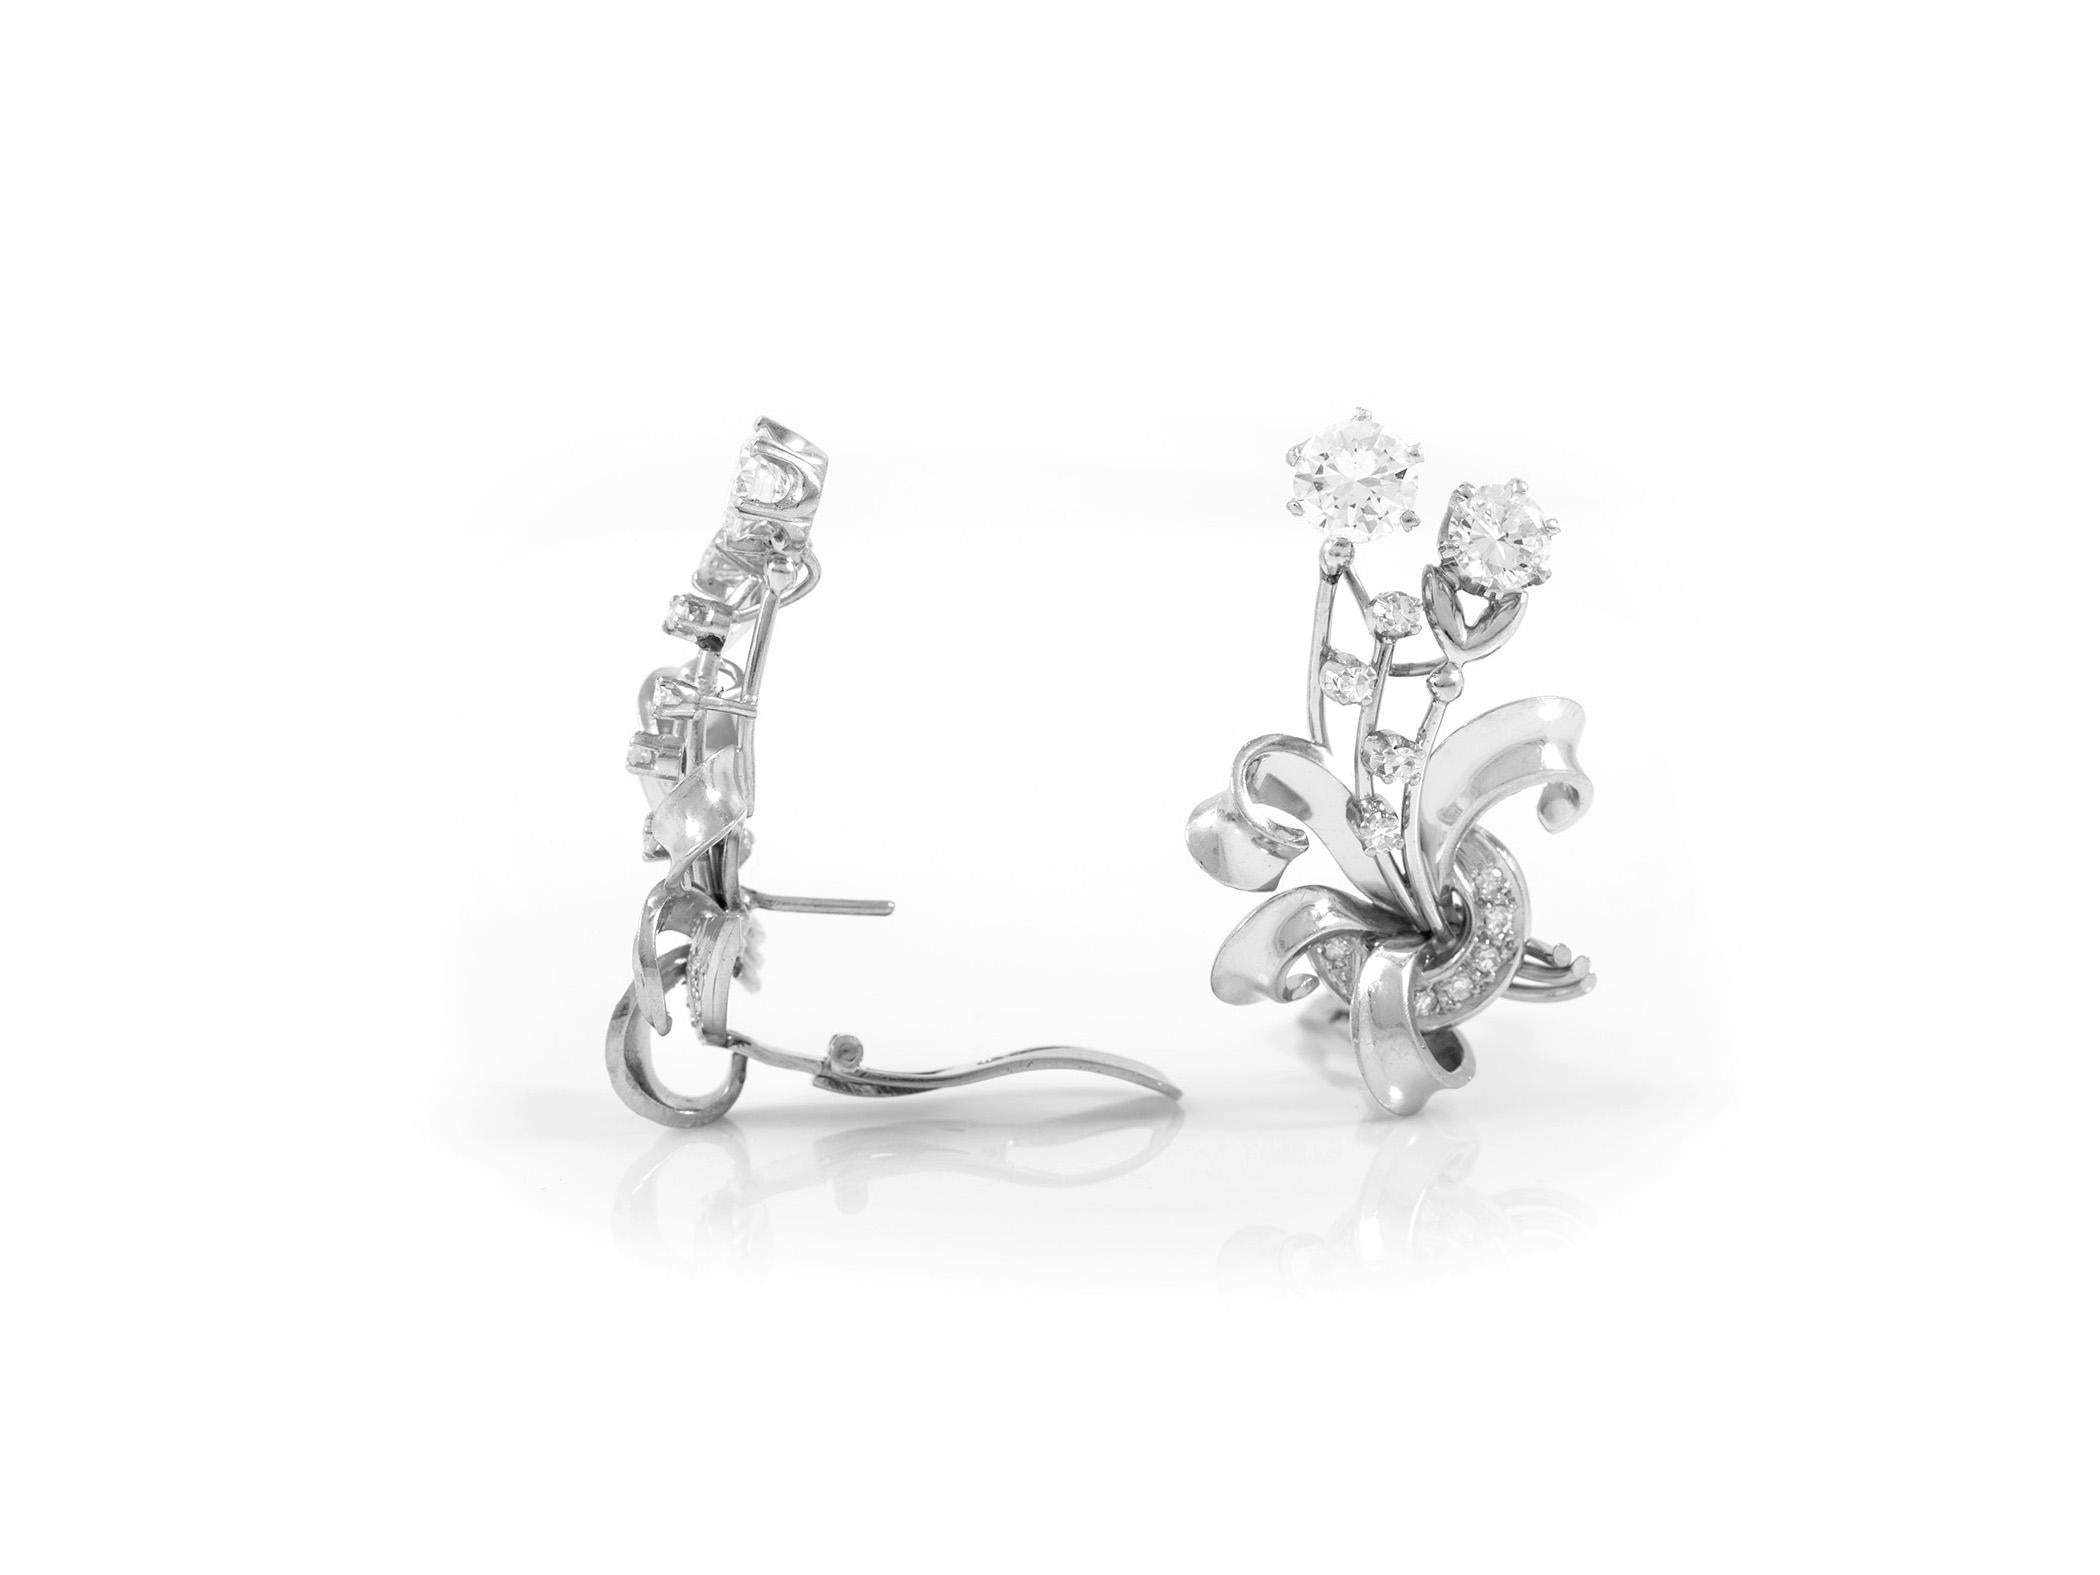 The earrings are finely crafted in platinum with diamonds weighing approximately total of 3.80carat.